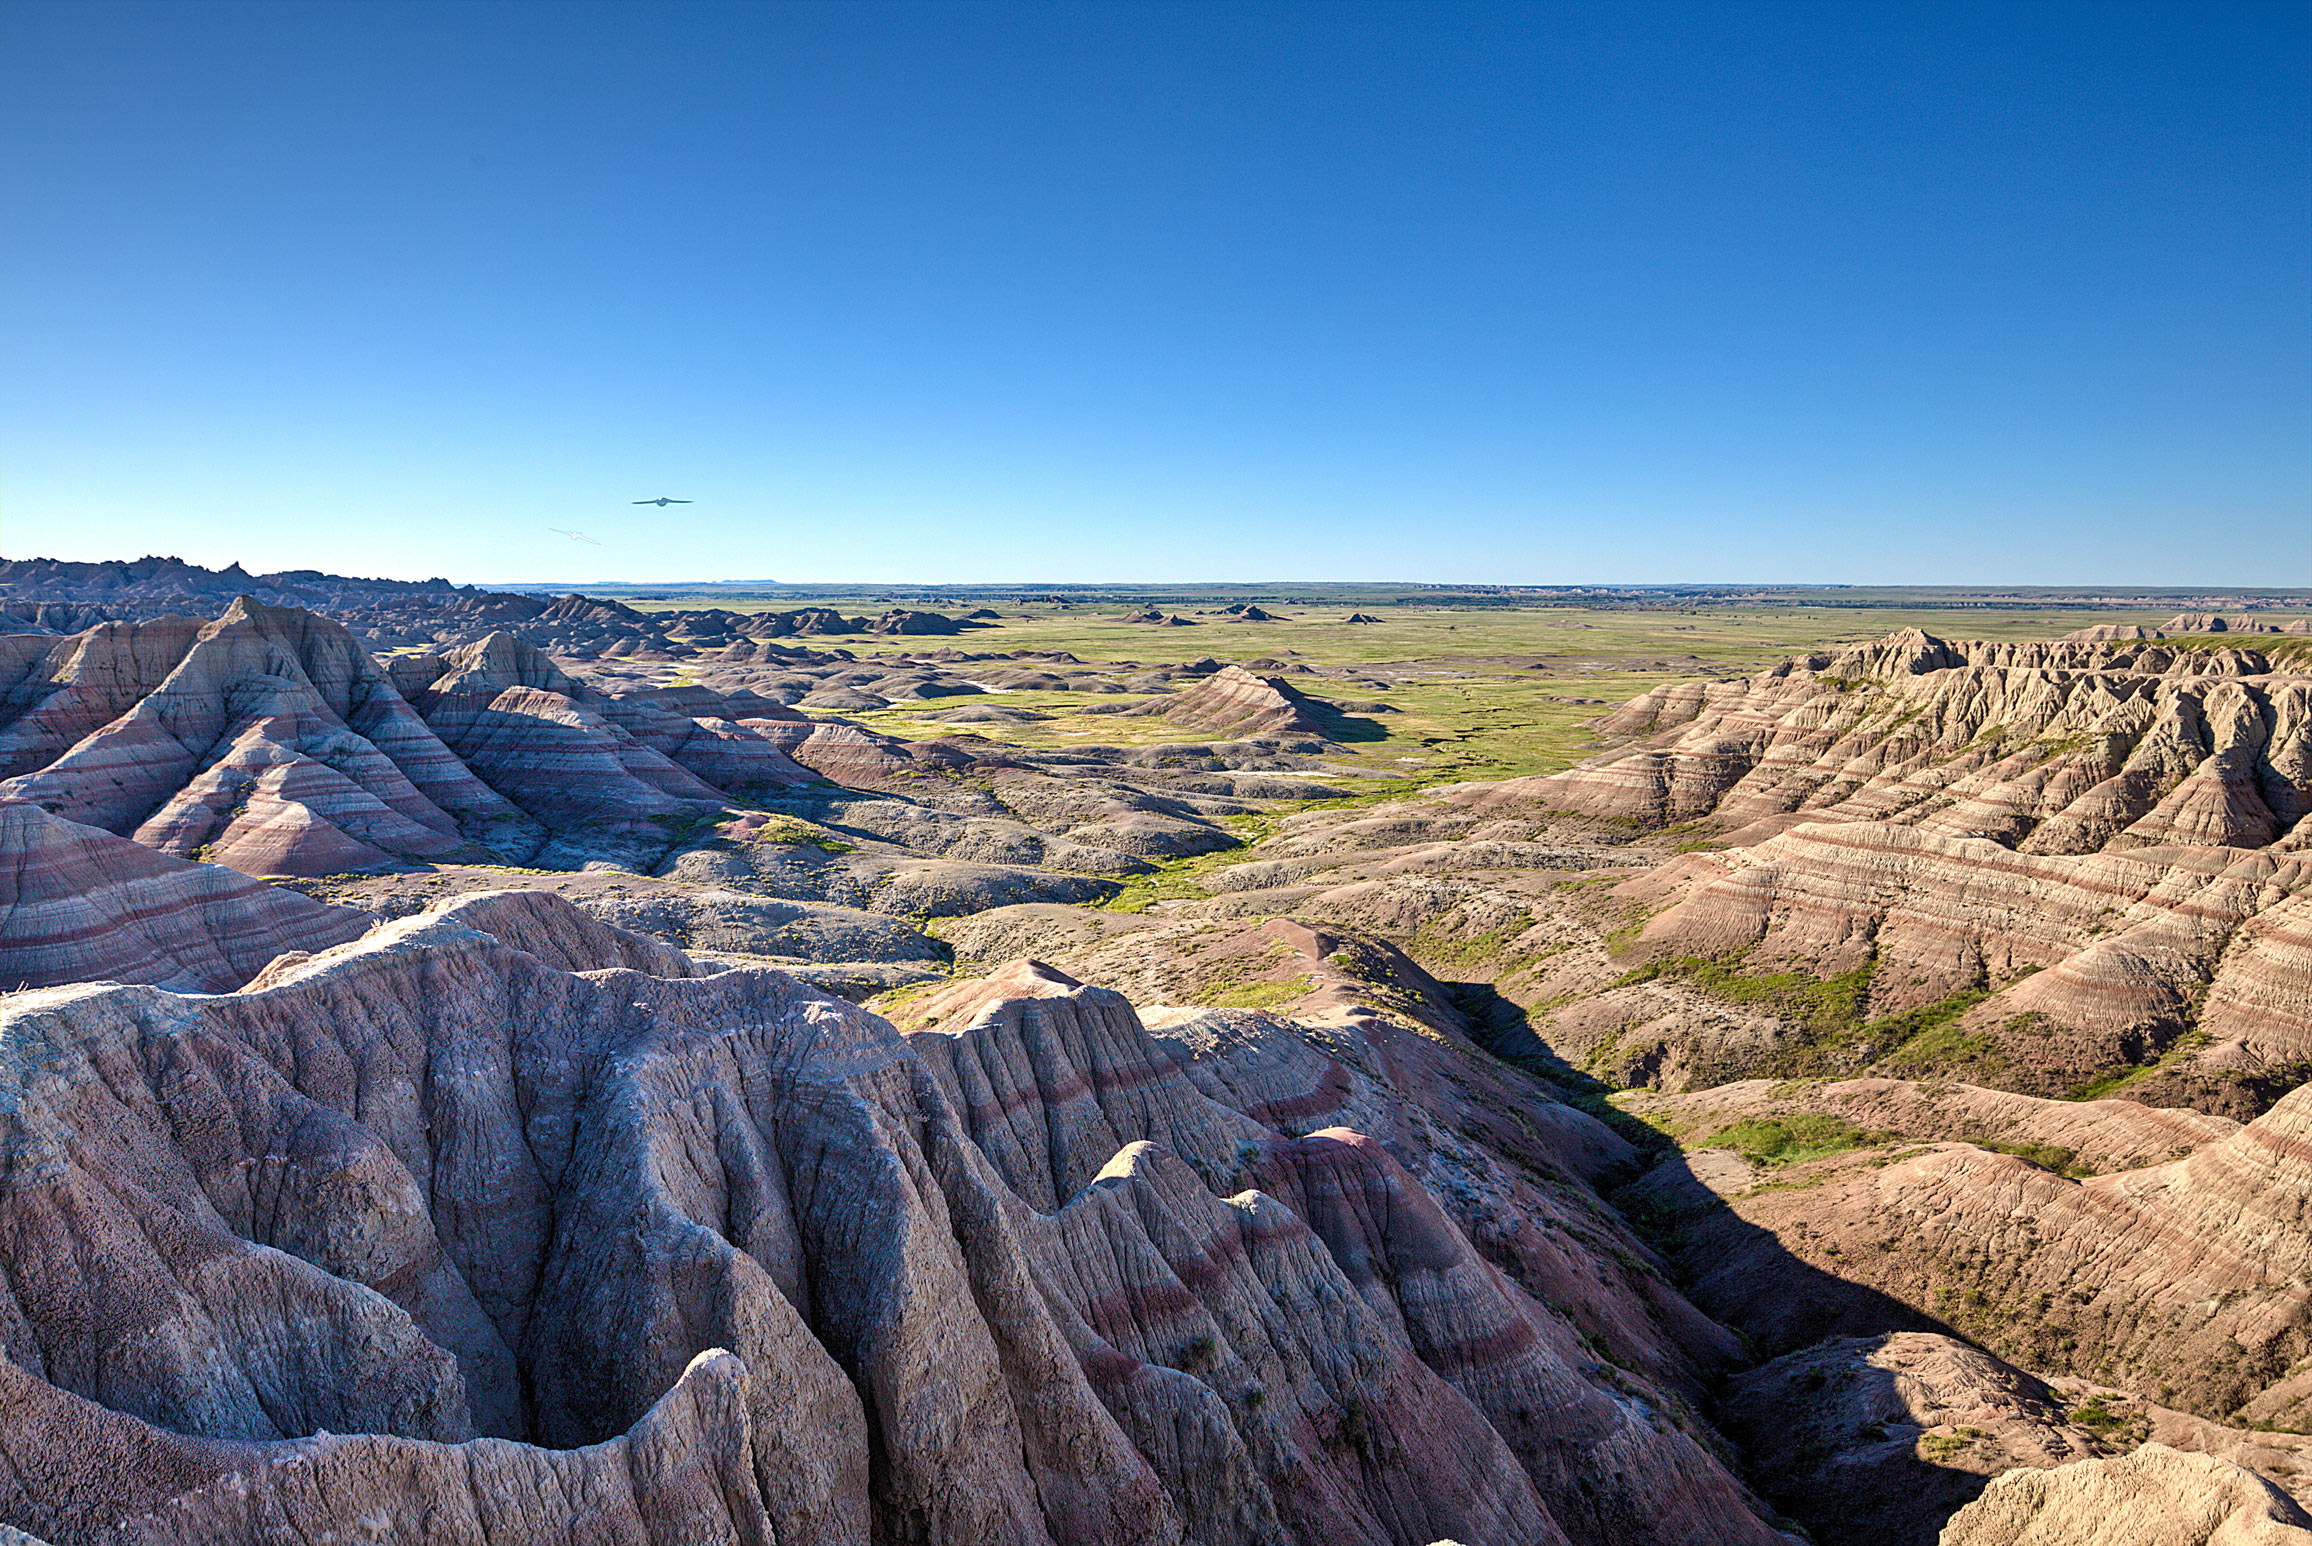 Valley of the Badlands